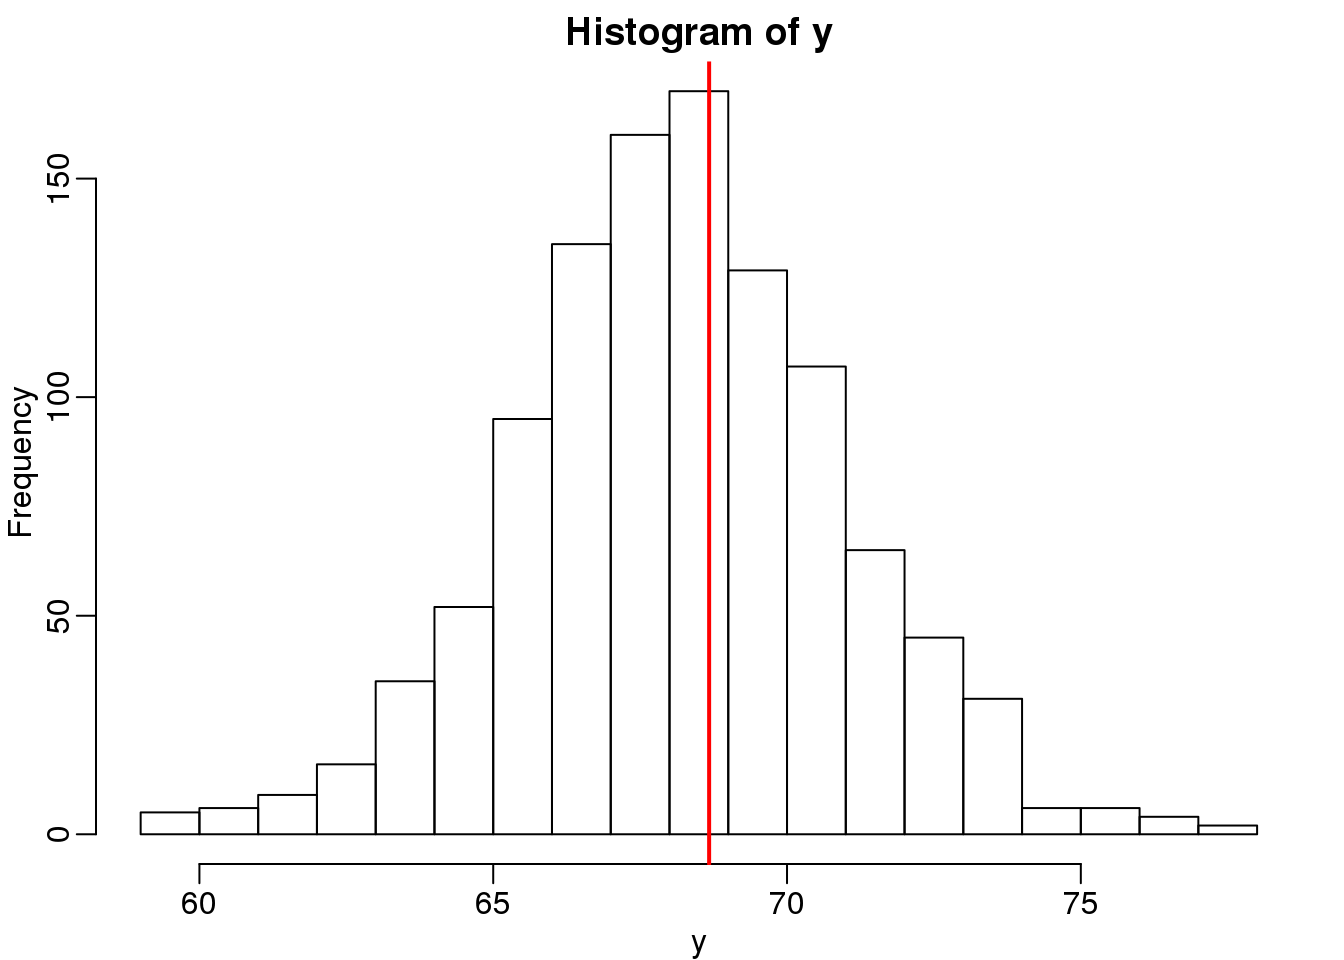 Histogram of son heights.